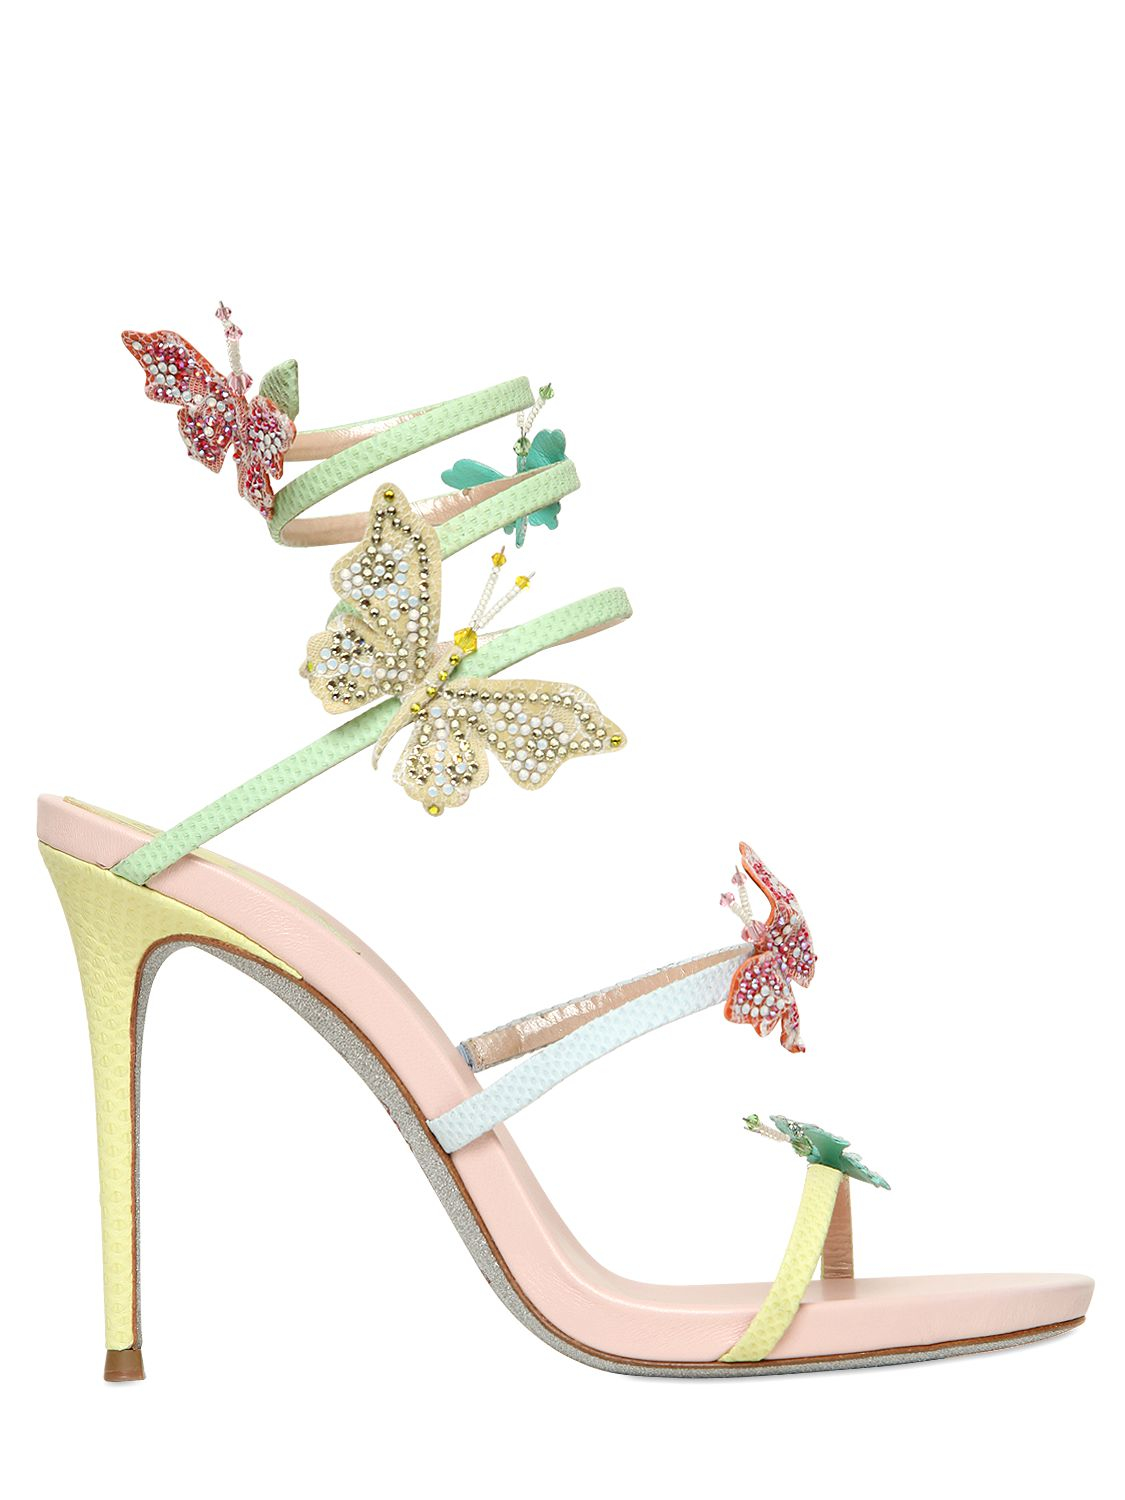 Rene Caovilla 105mm Butterfly Karung & Leather Sandals - Lyst